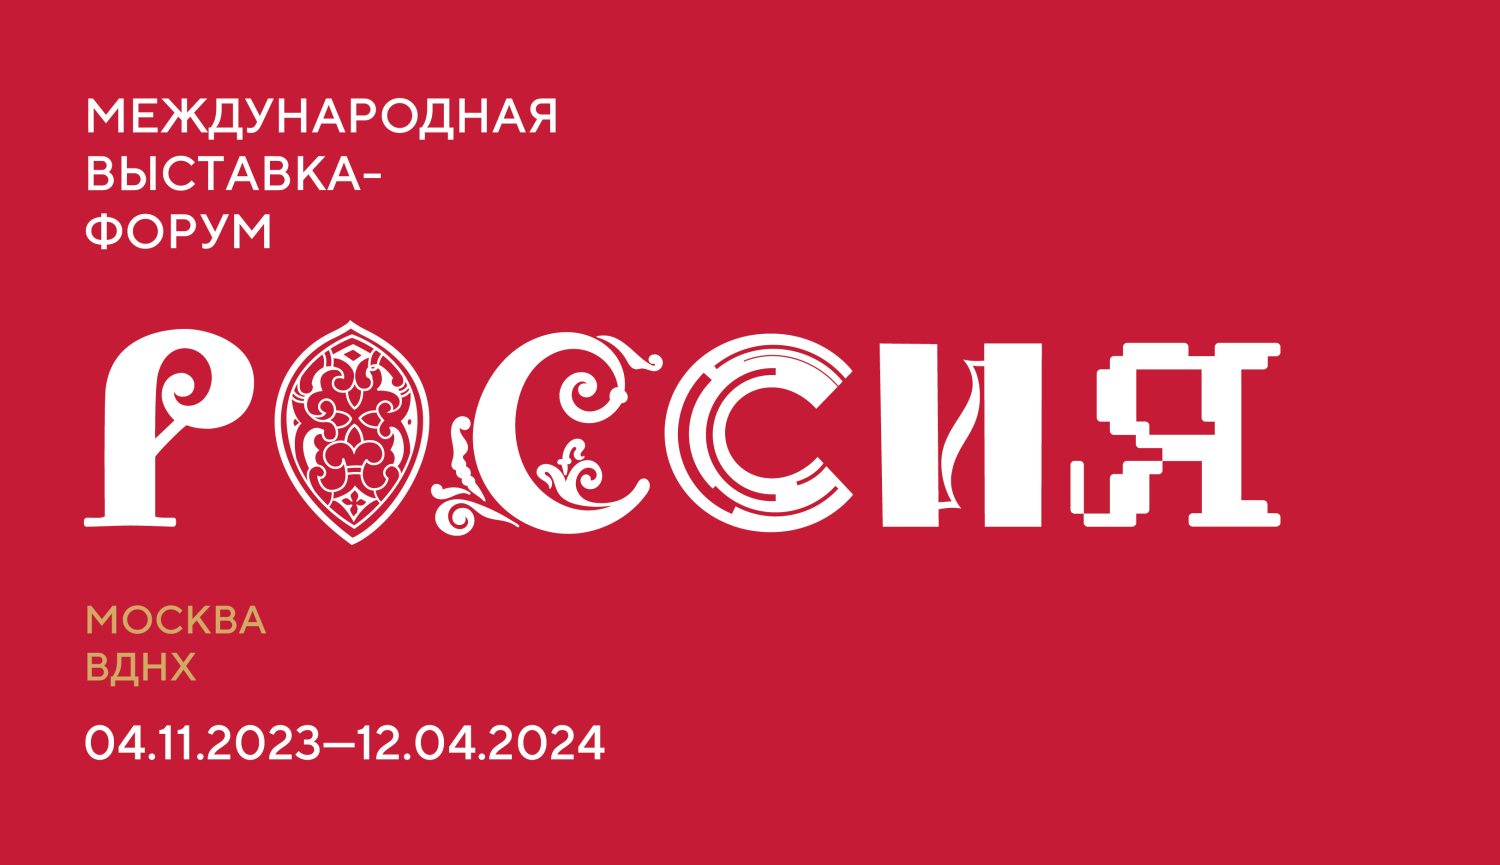 Russia International Exhibition and Forum